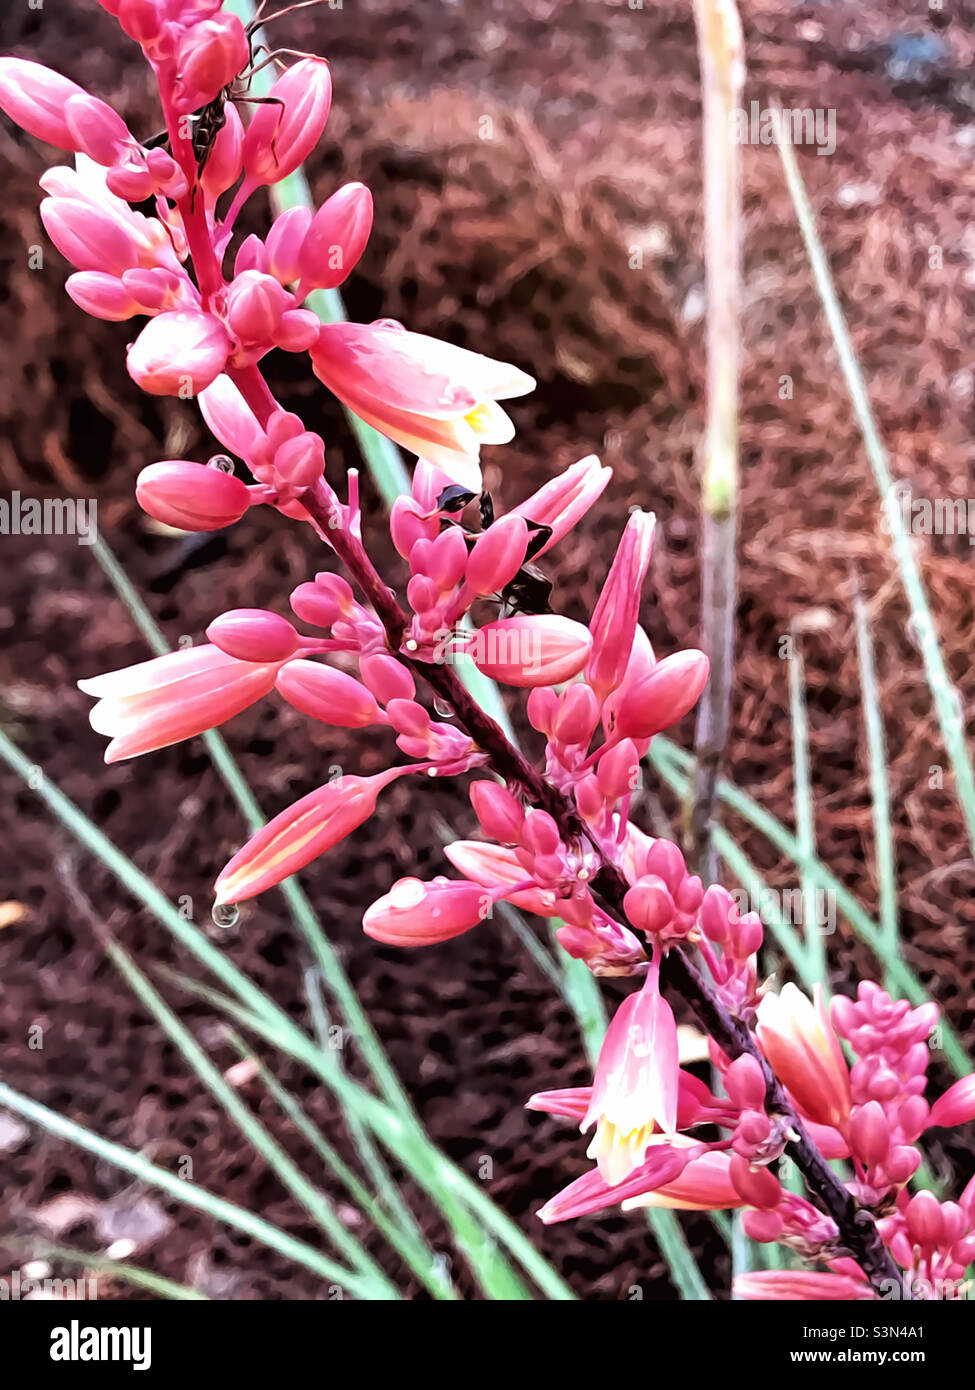 A beautiful red and yellow colored hesperaloe parviflora flowering plant. Digital art. Stock Photo